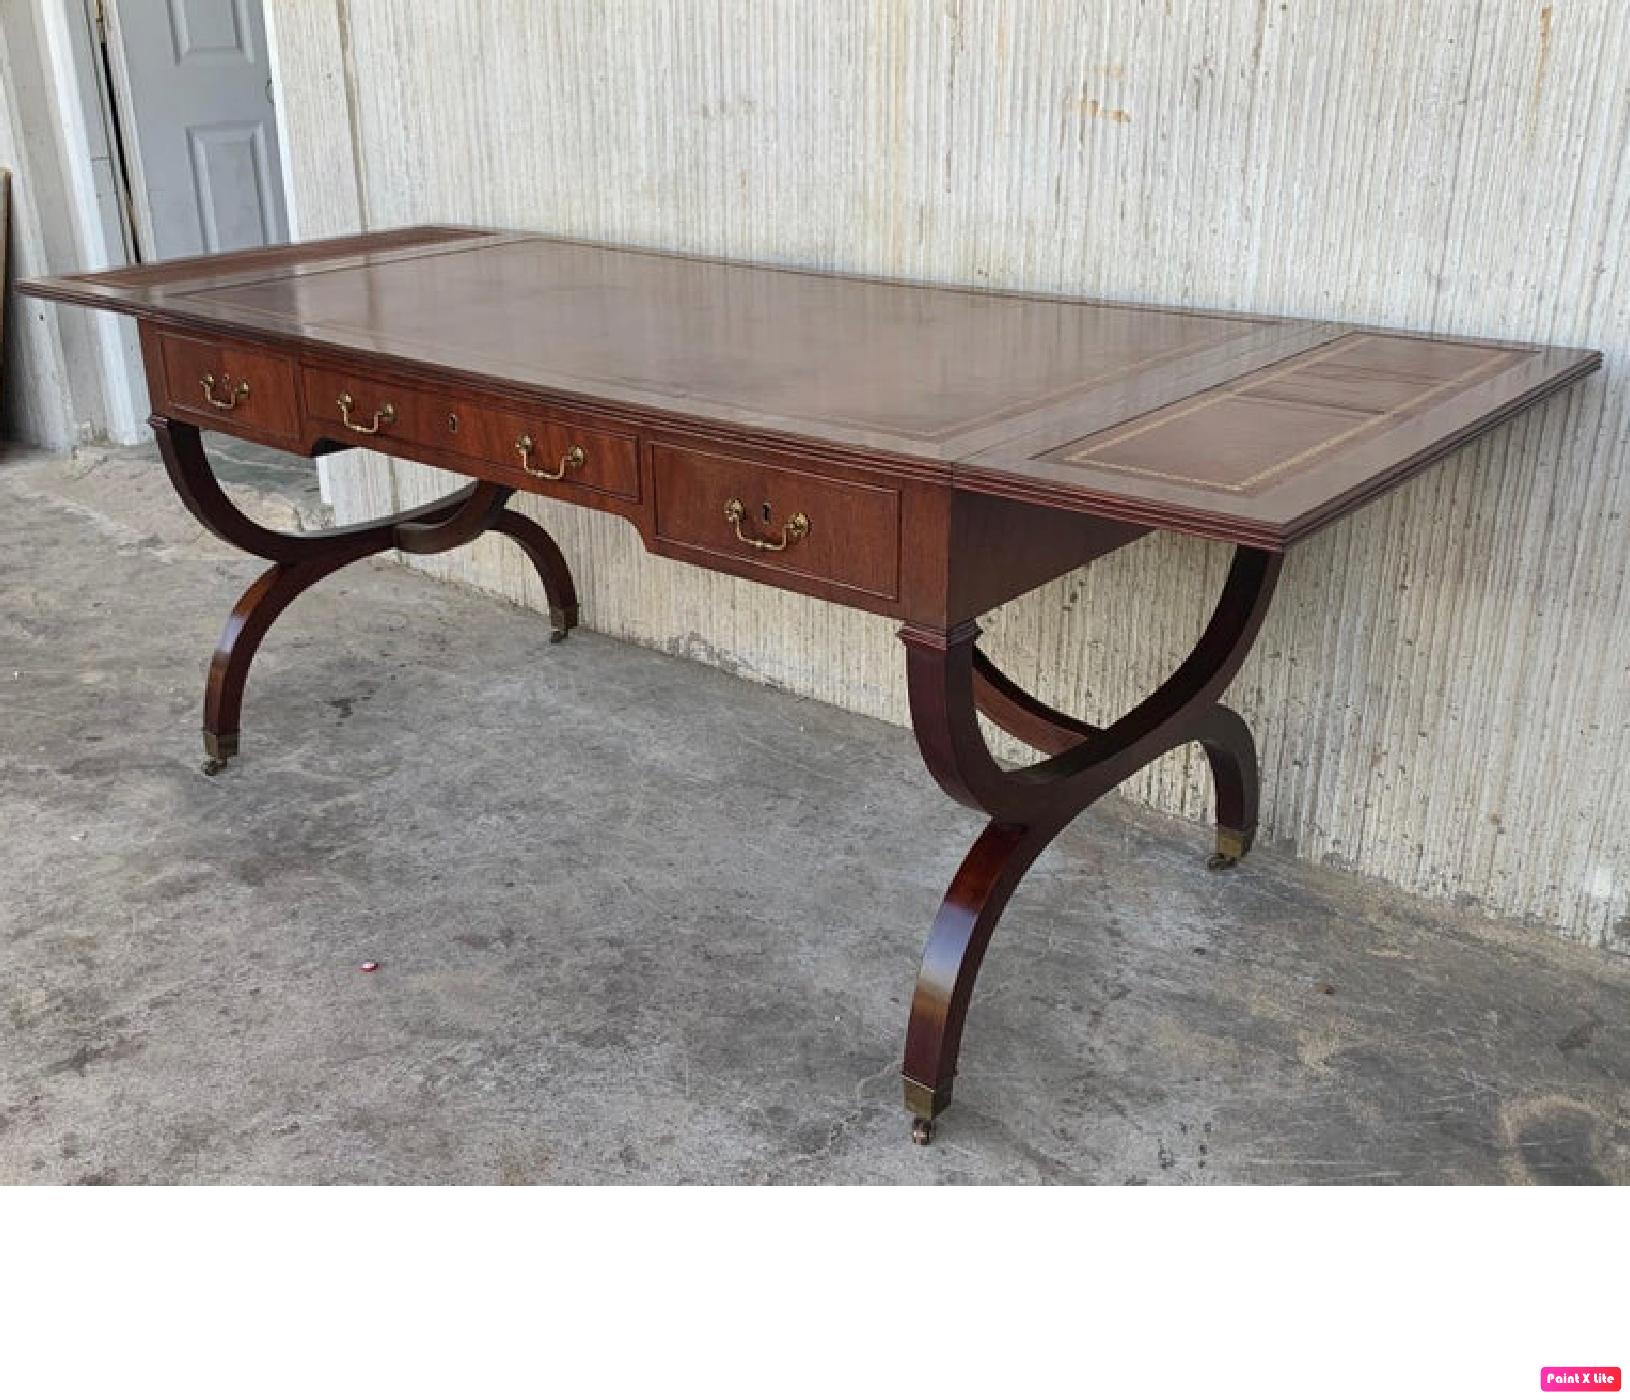 Stunning Victorian Library Writing Table or Desk Brown Leather Top Gillows Legs In Good Condition For Sale In Miami, FL